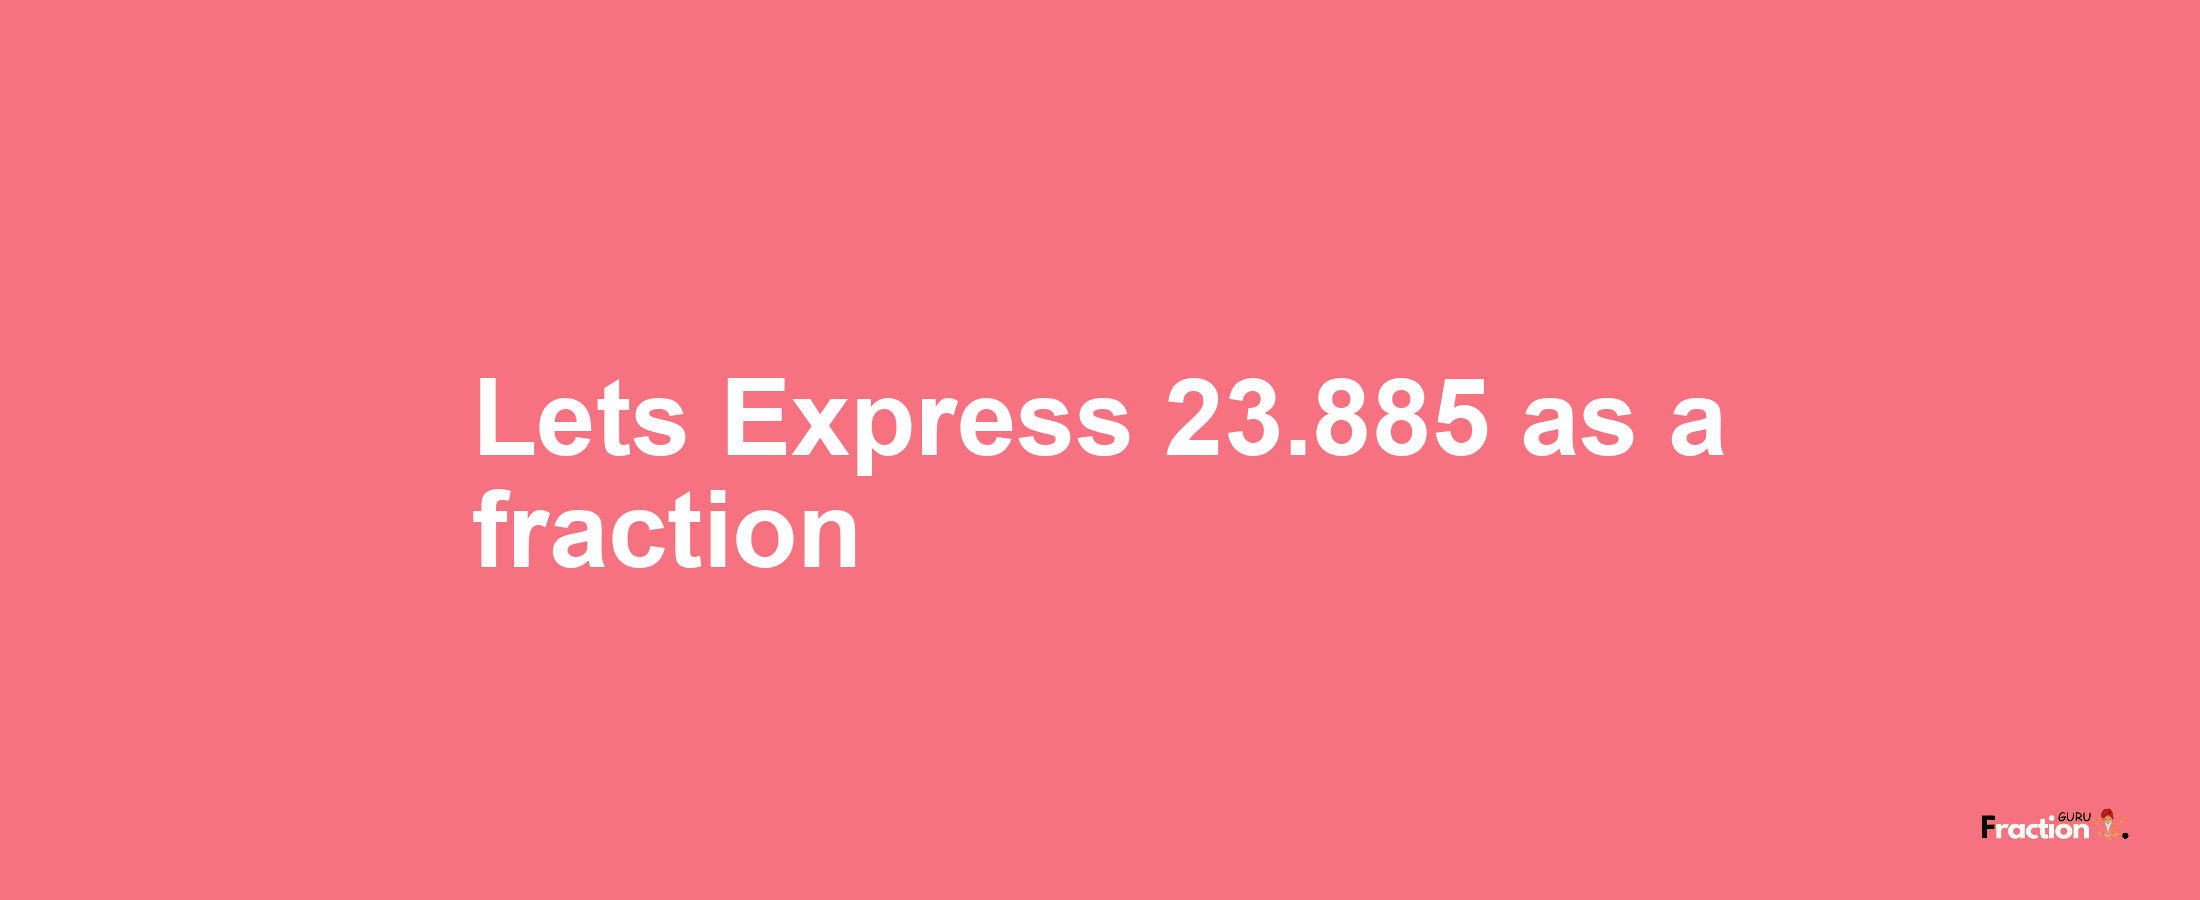 Lets Express 23.885 as afraction